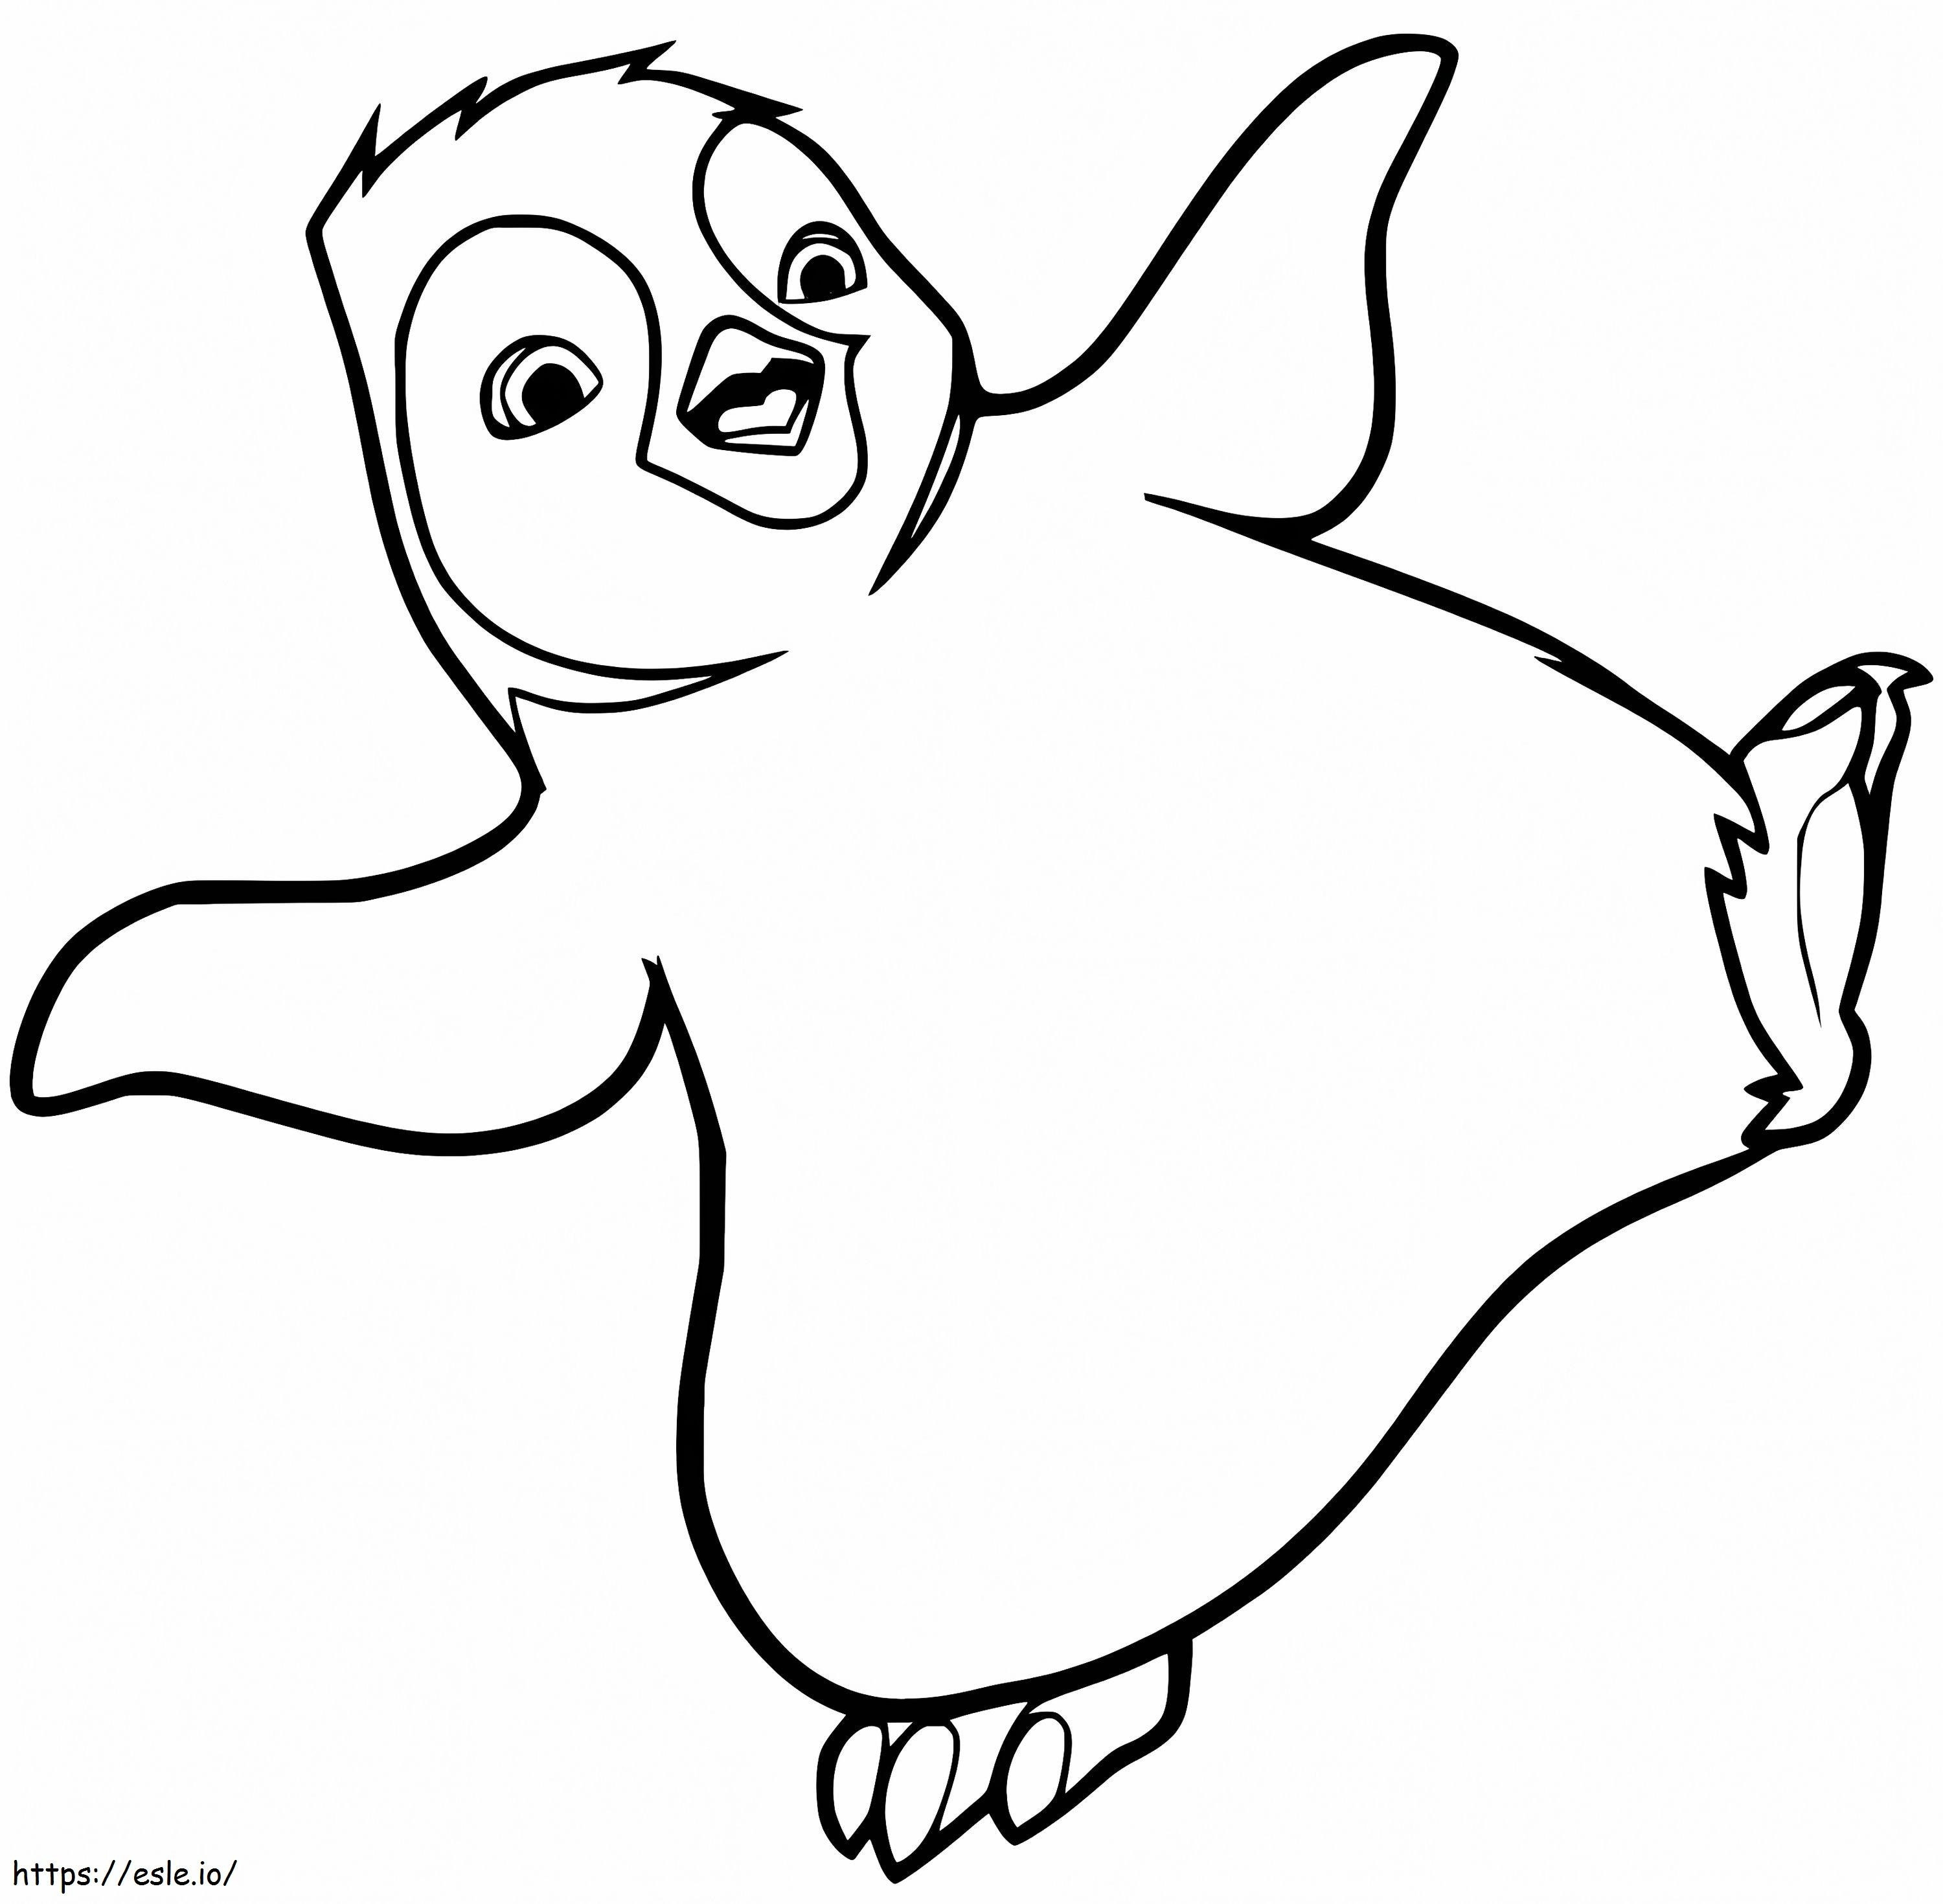 Erik From Happy Feet coloring page